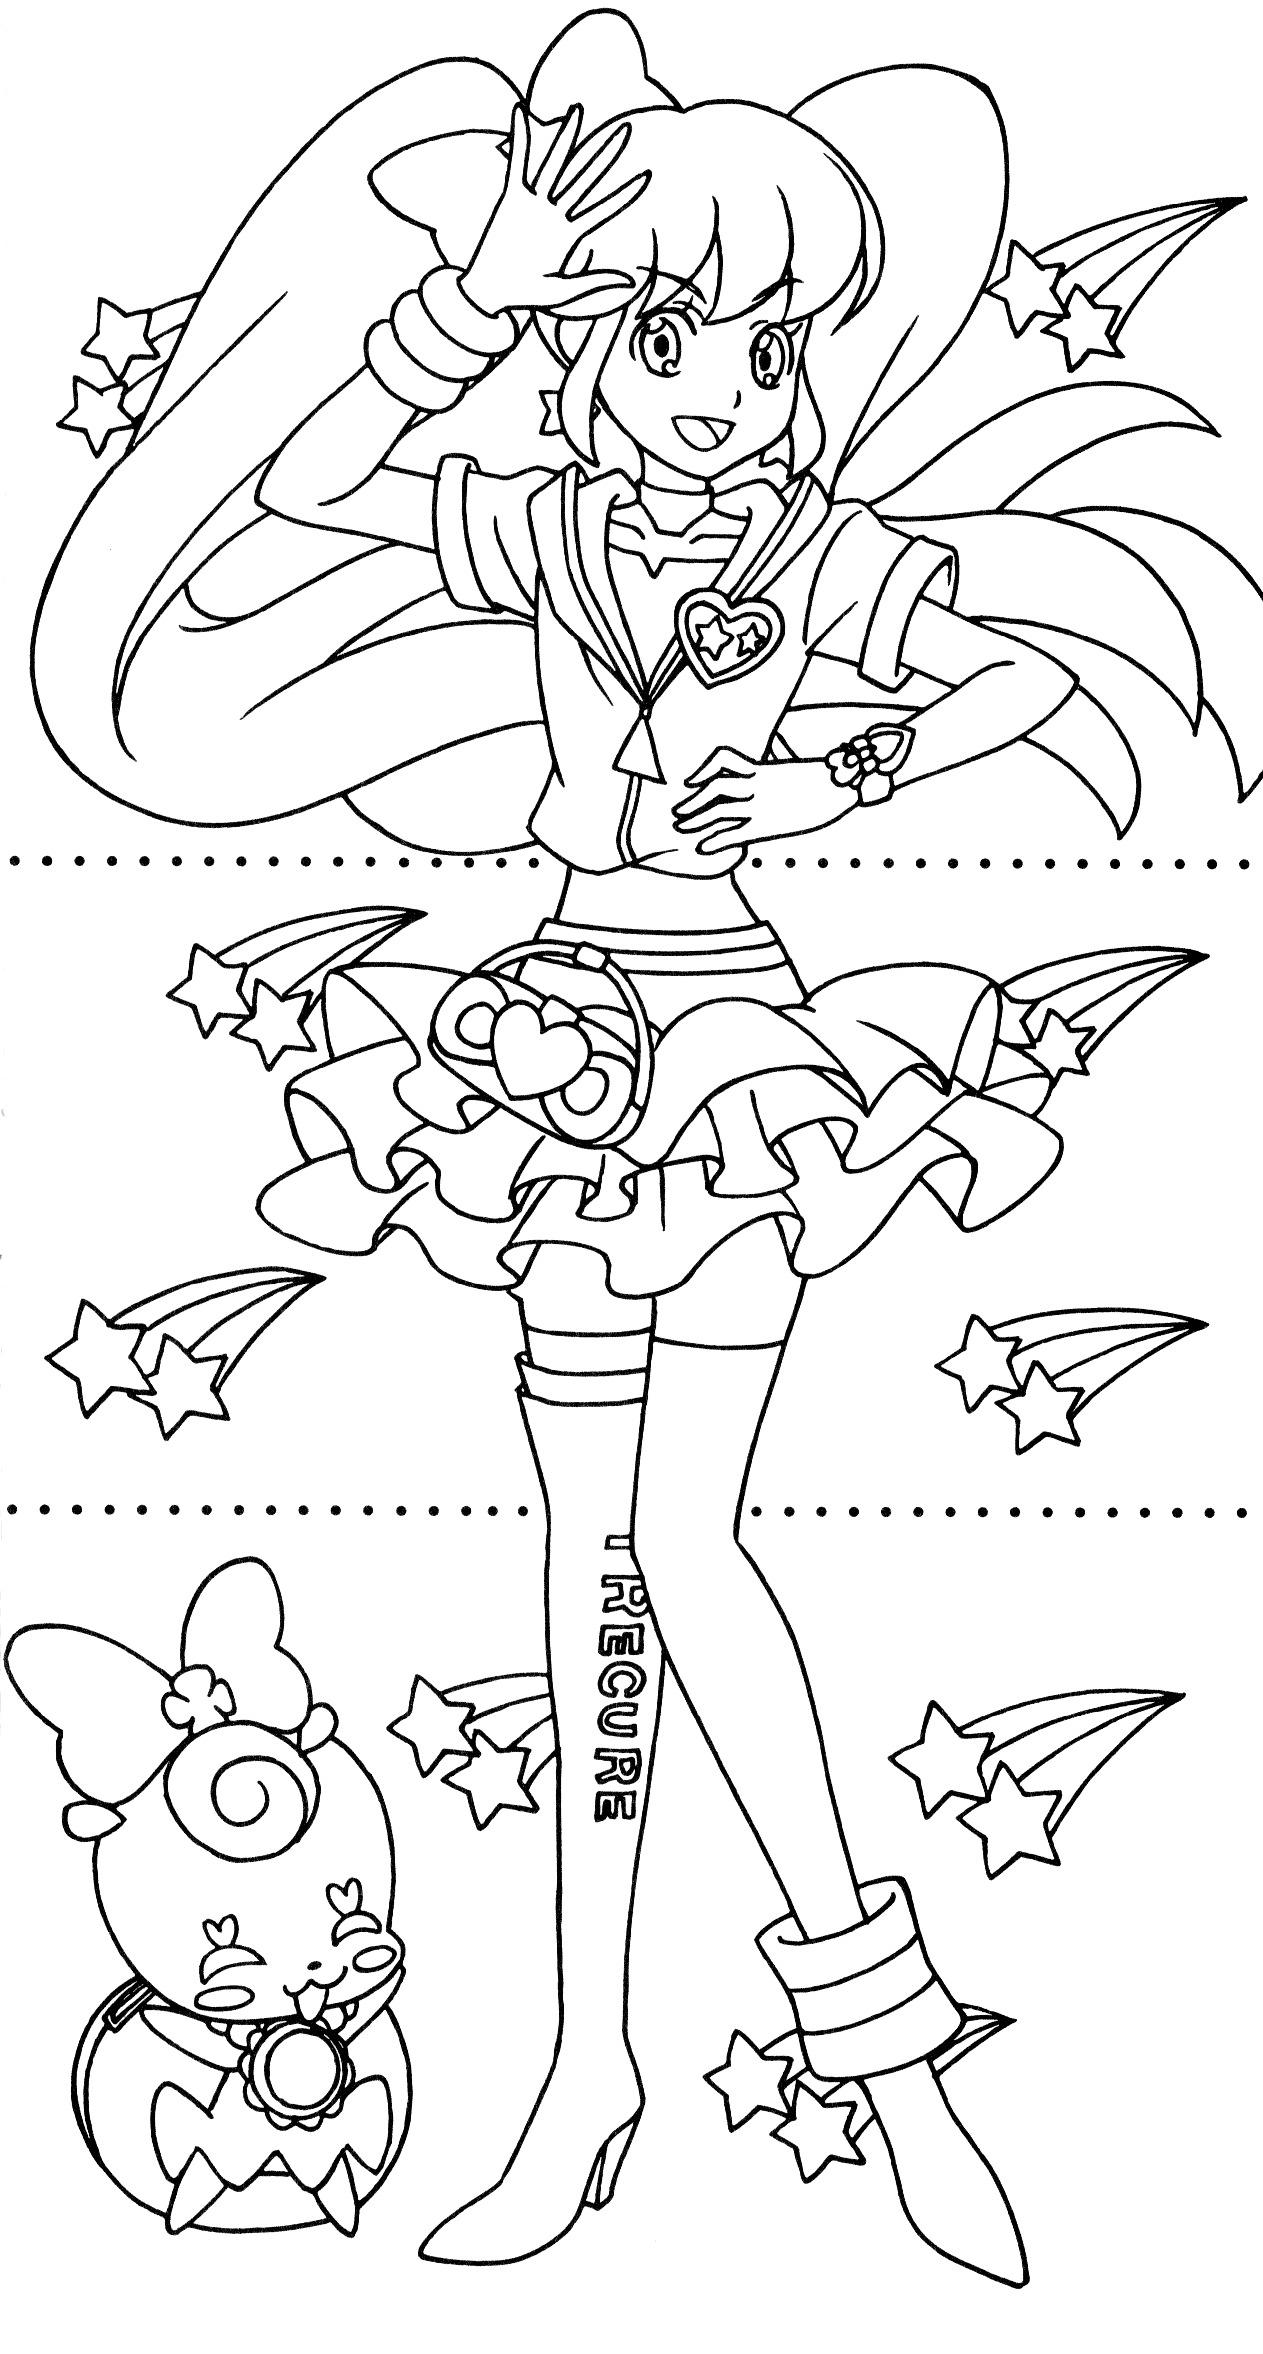 Happiness Charge Precure Dressup Coloring Book 11